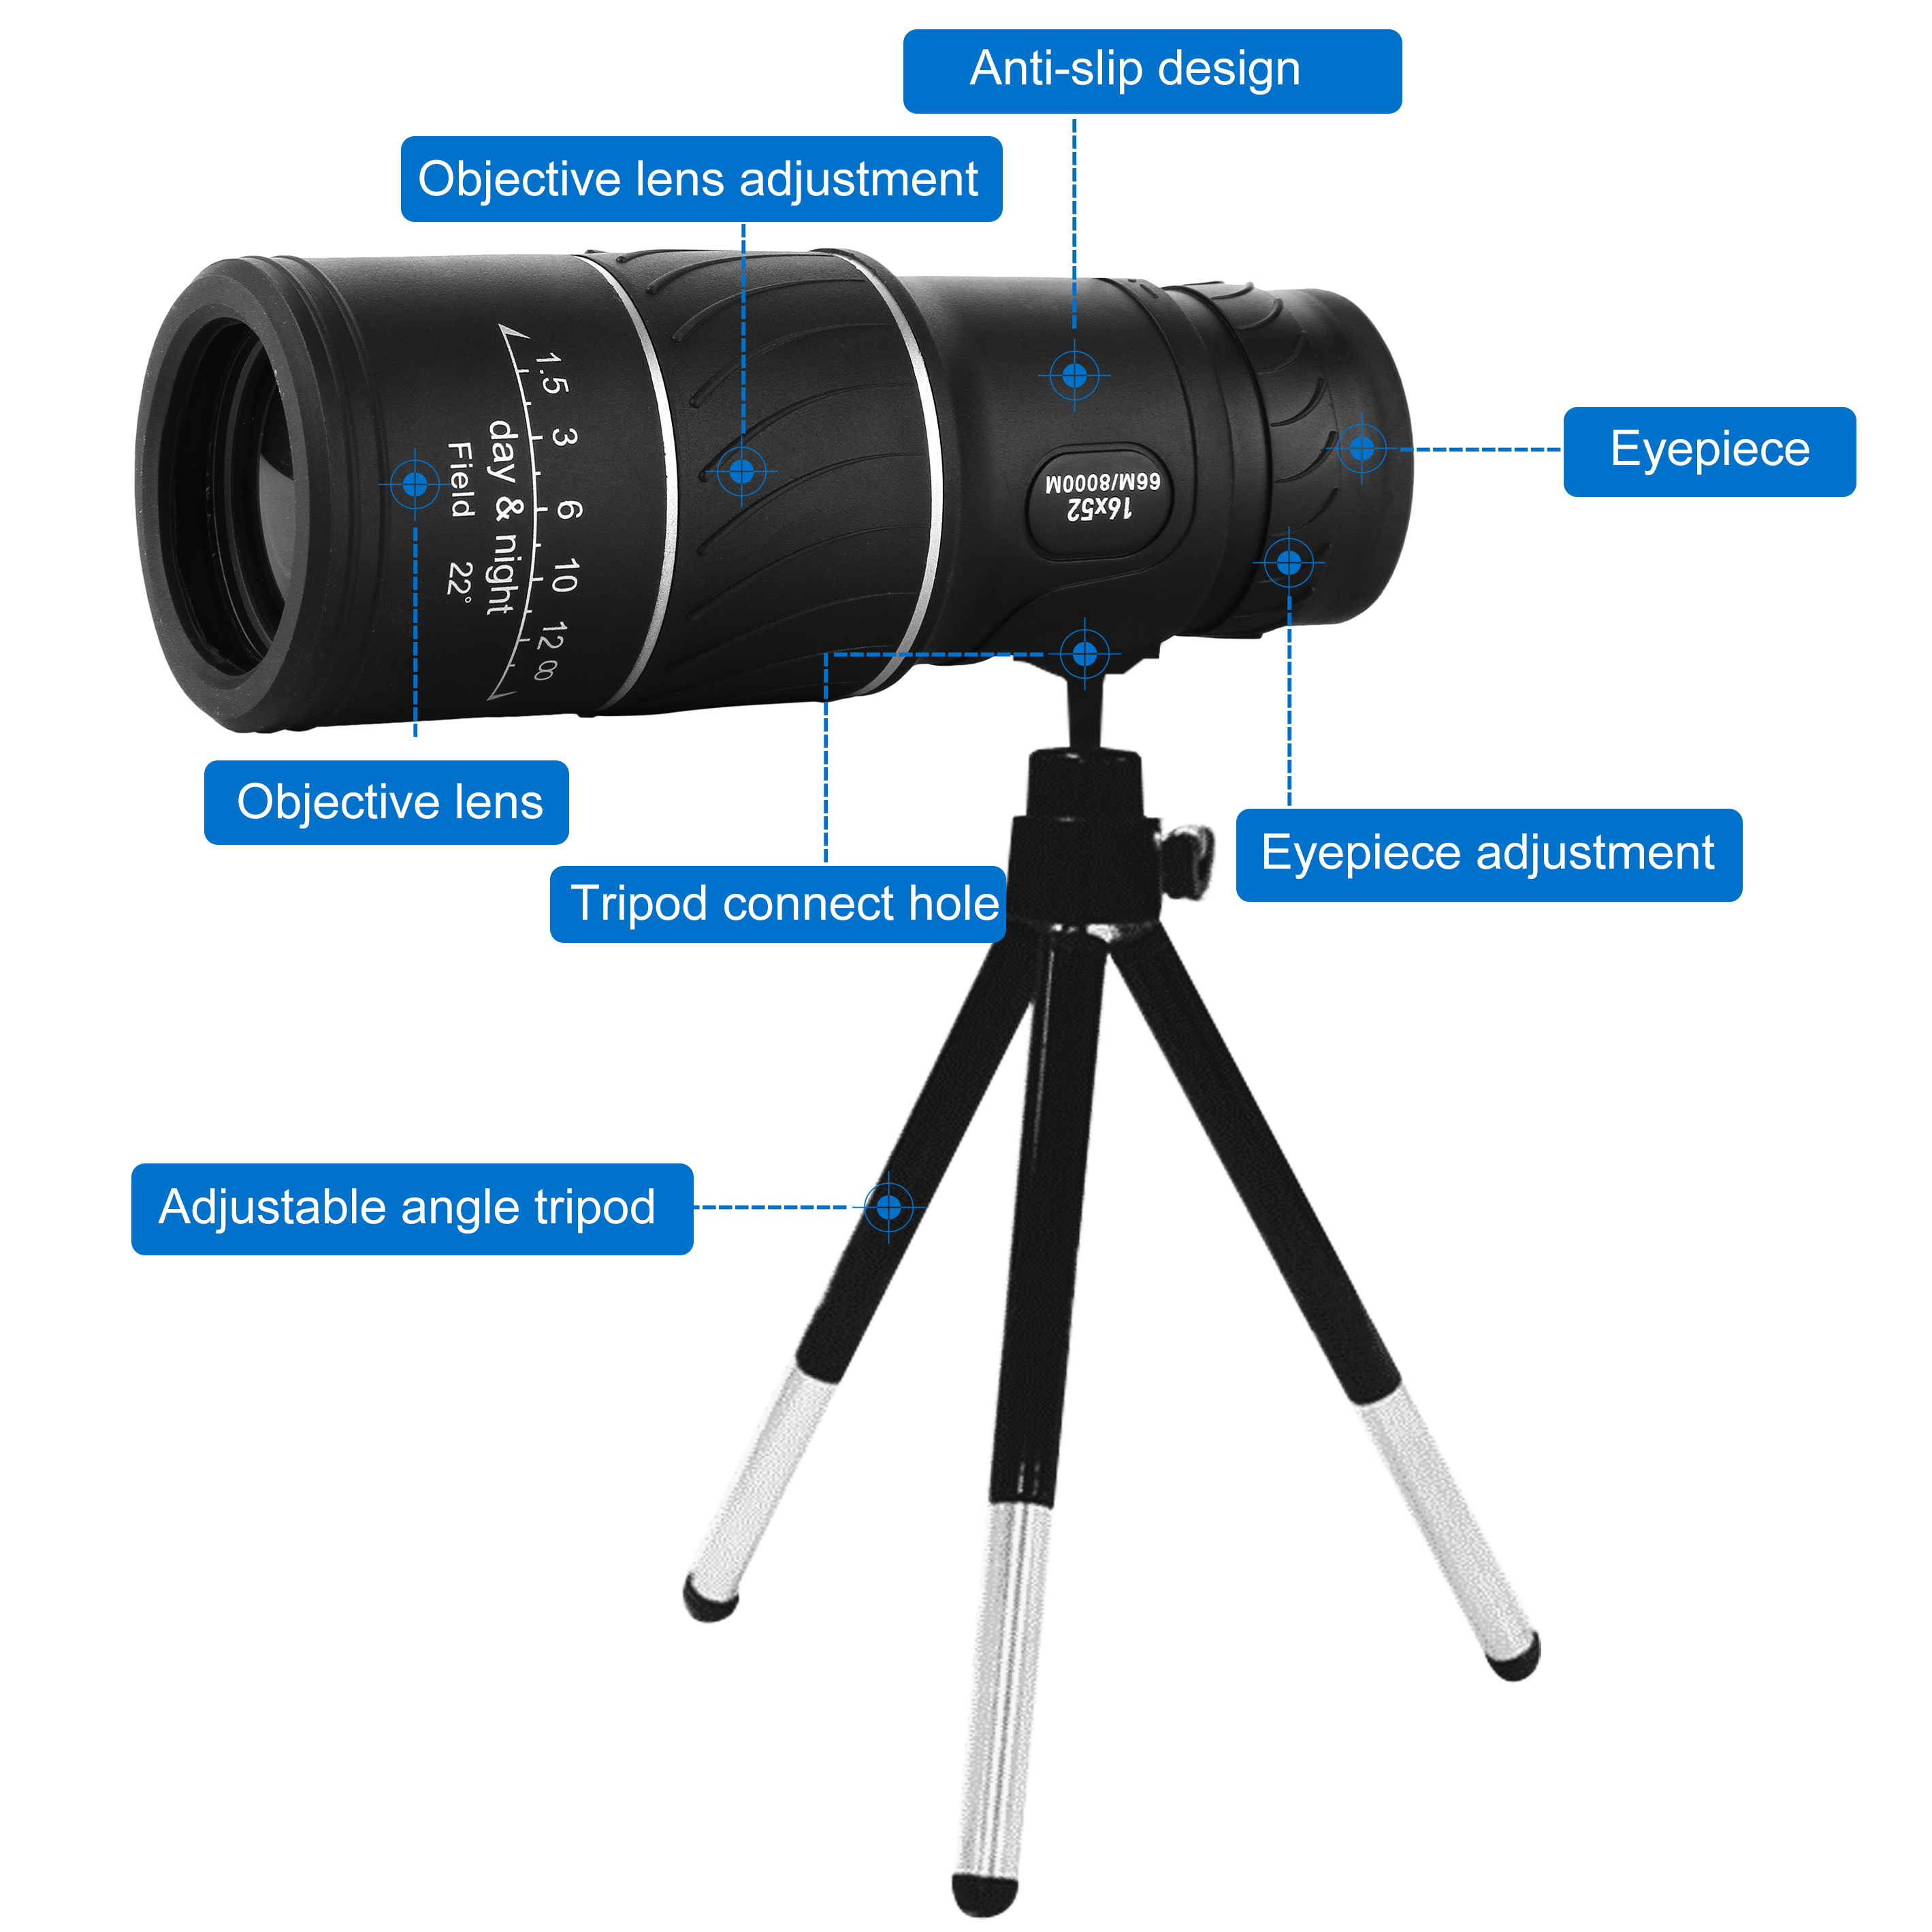 16x52 Monocular Telescope,AOBETAK High Power Spotting Scopes Equipped With Phone Adaptor and Tripod, Low Light Night Vision Binoculars or Adults Kids Bird Watching Traveling, Outdoors 98m/ 8000m